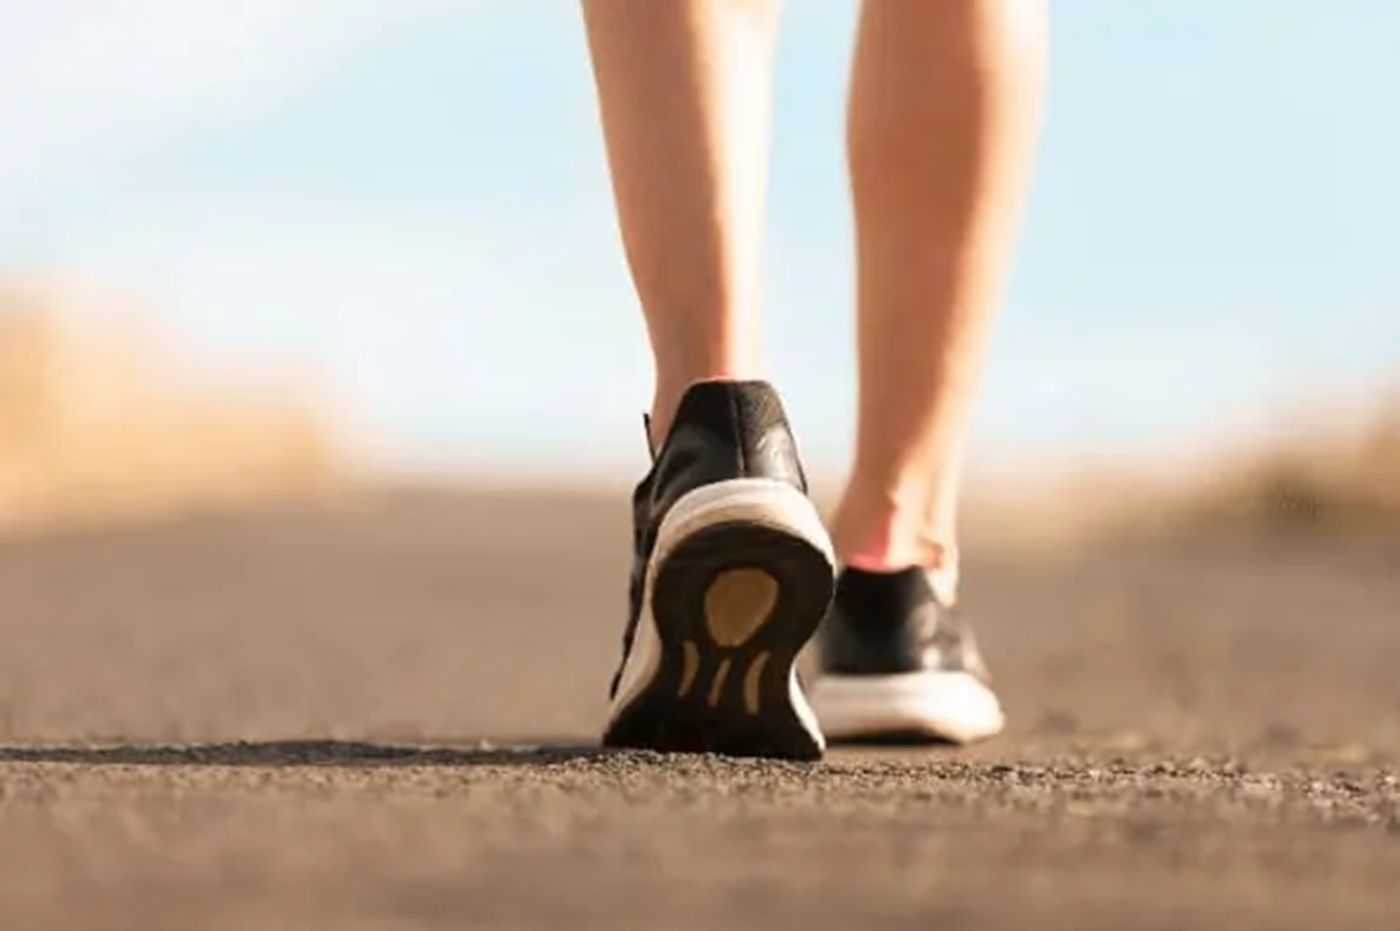 Health: Low to moderate intensity exercise protects against depression, according to research.